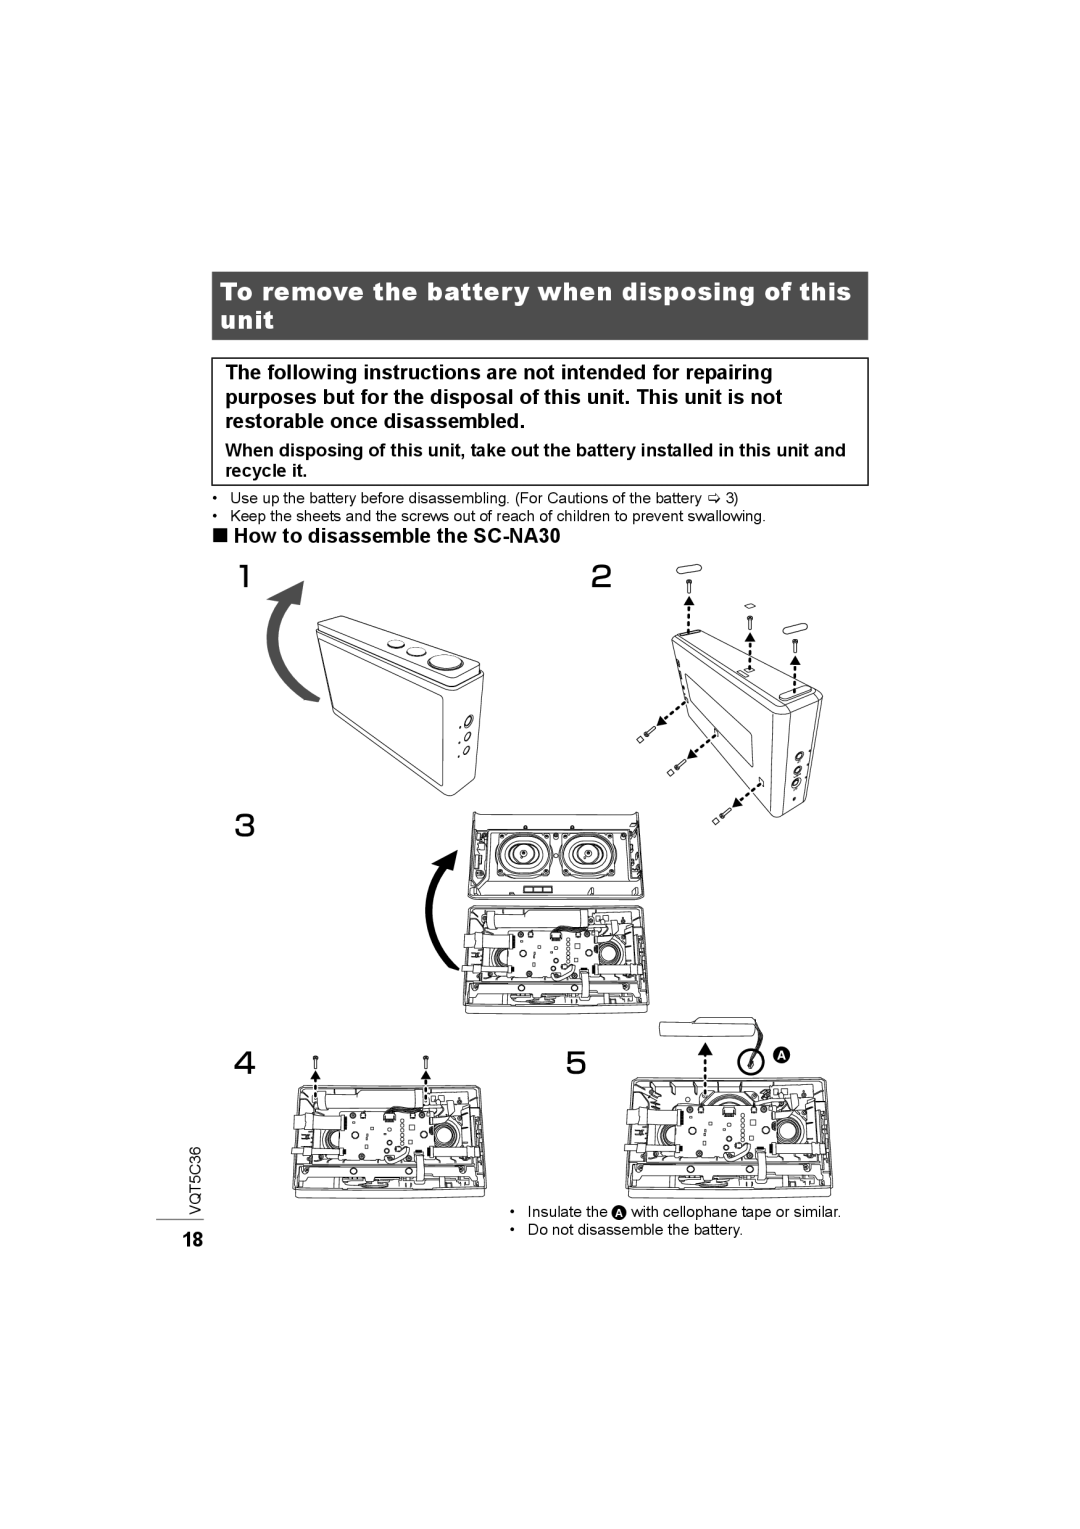 Panasonic owner manual To remove the battery when disposing of this unit, How to disassemble the SC-NA30 